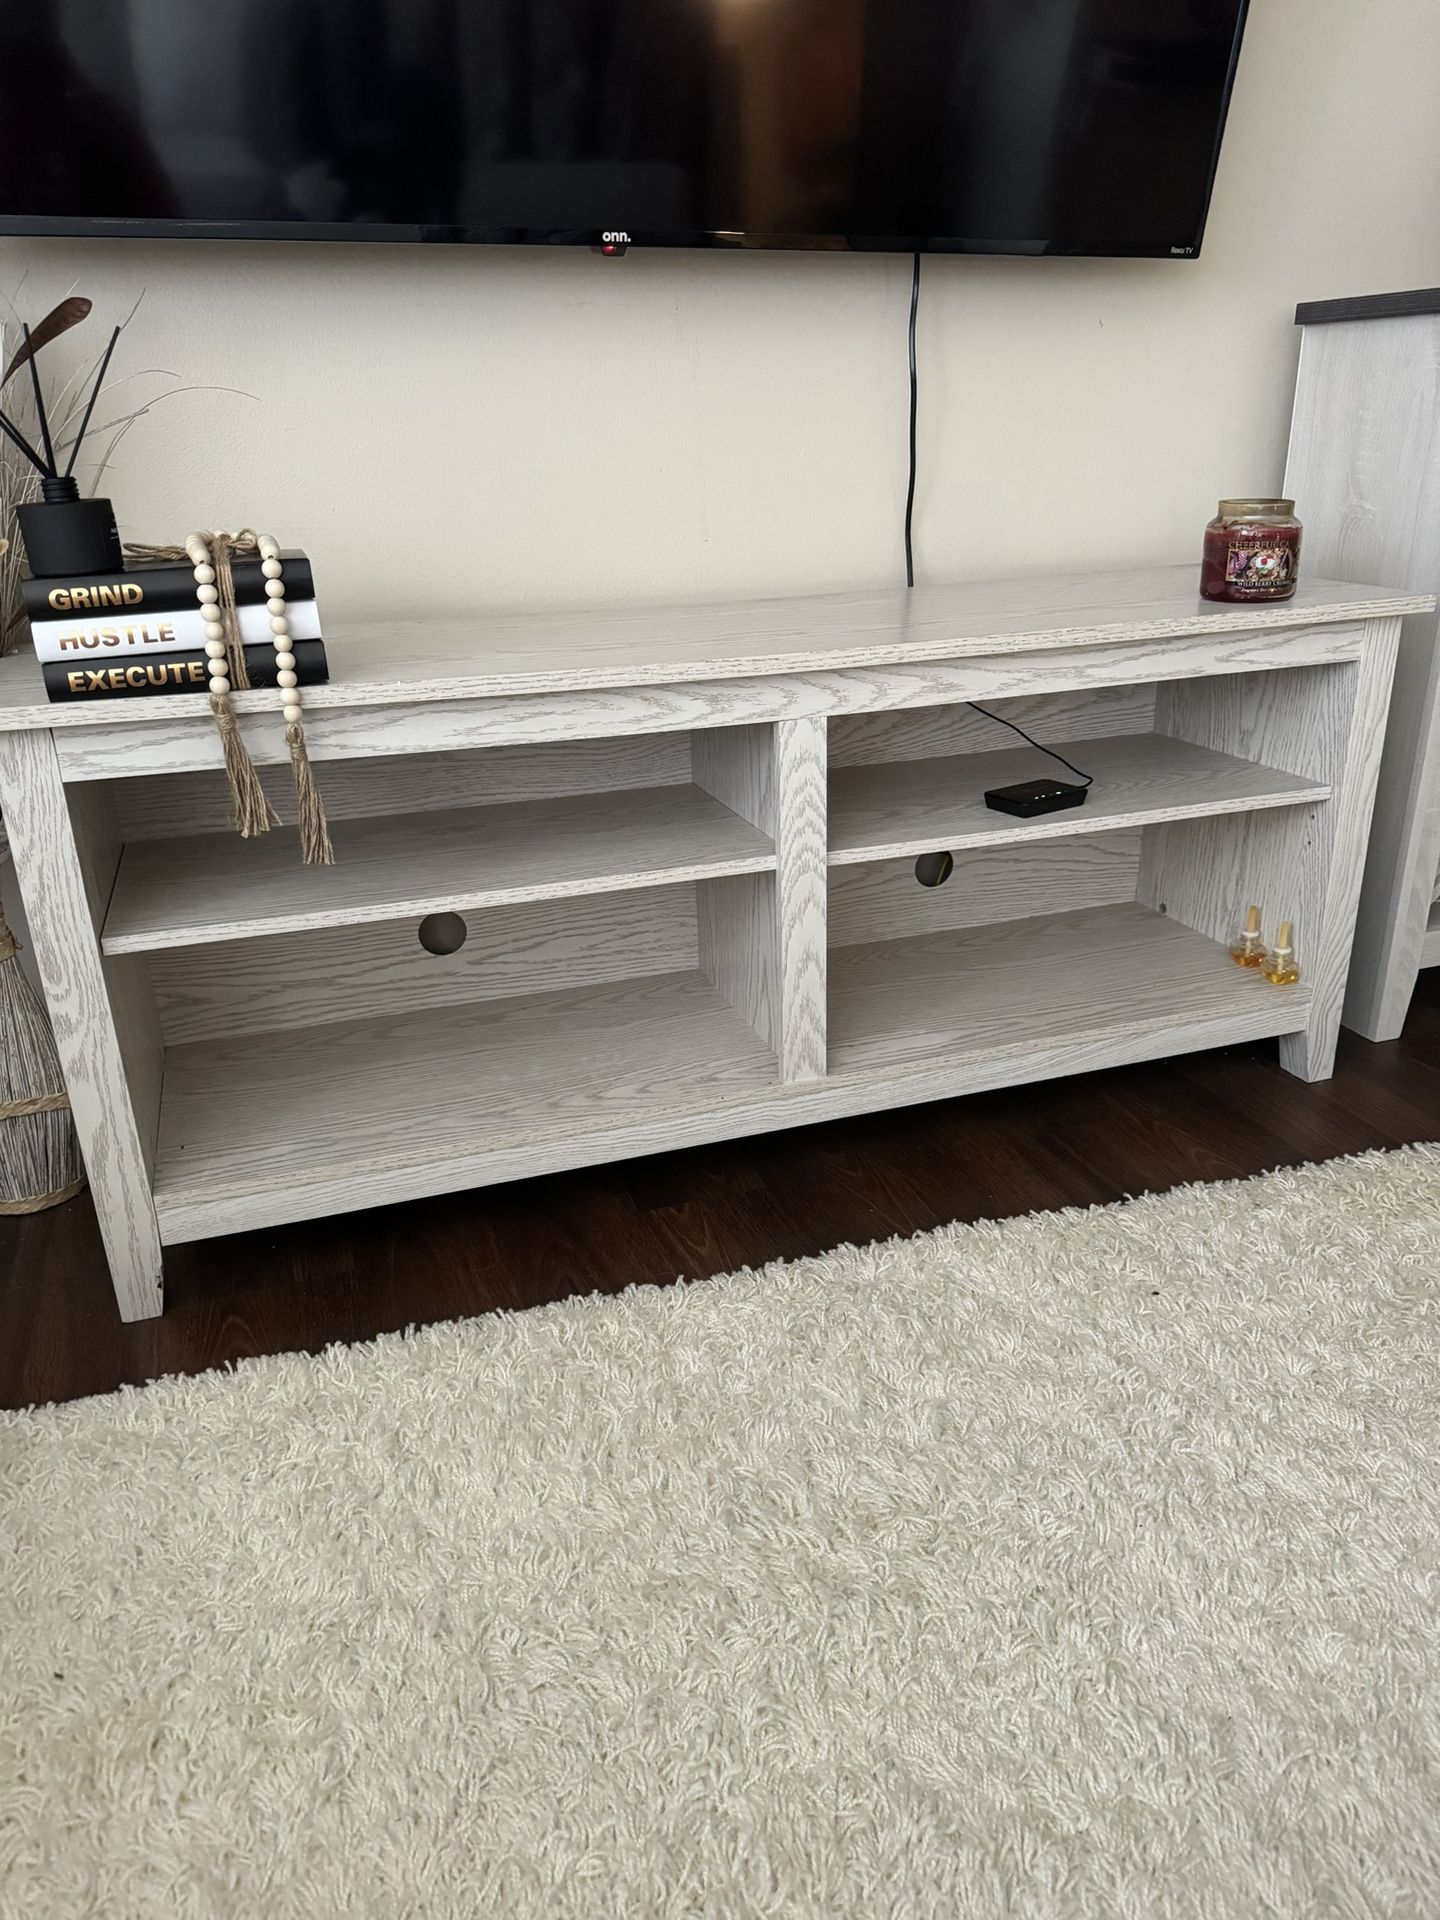 New Tv Stand 